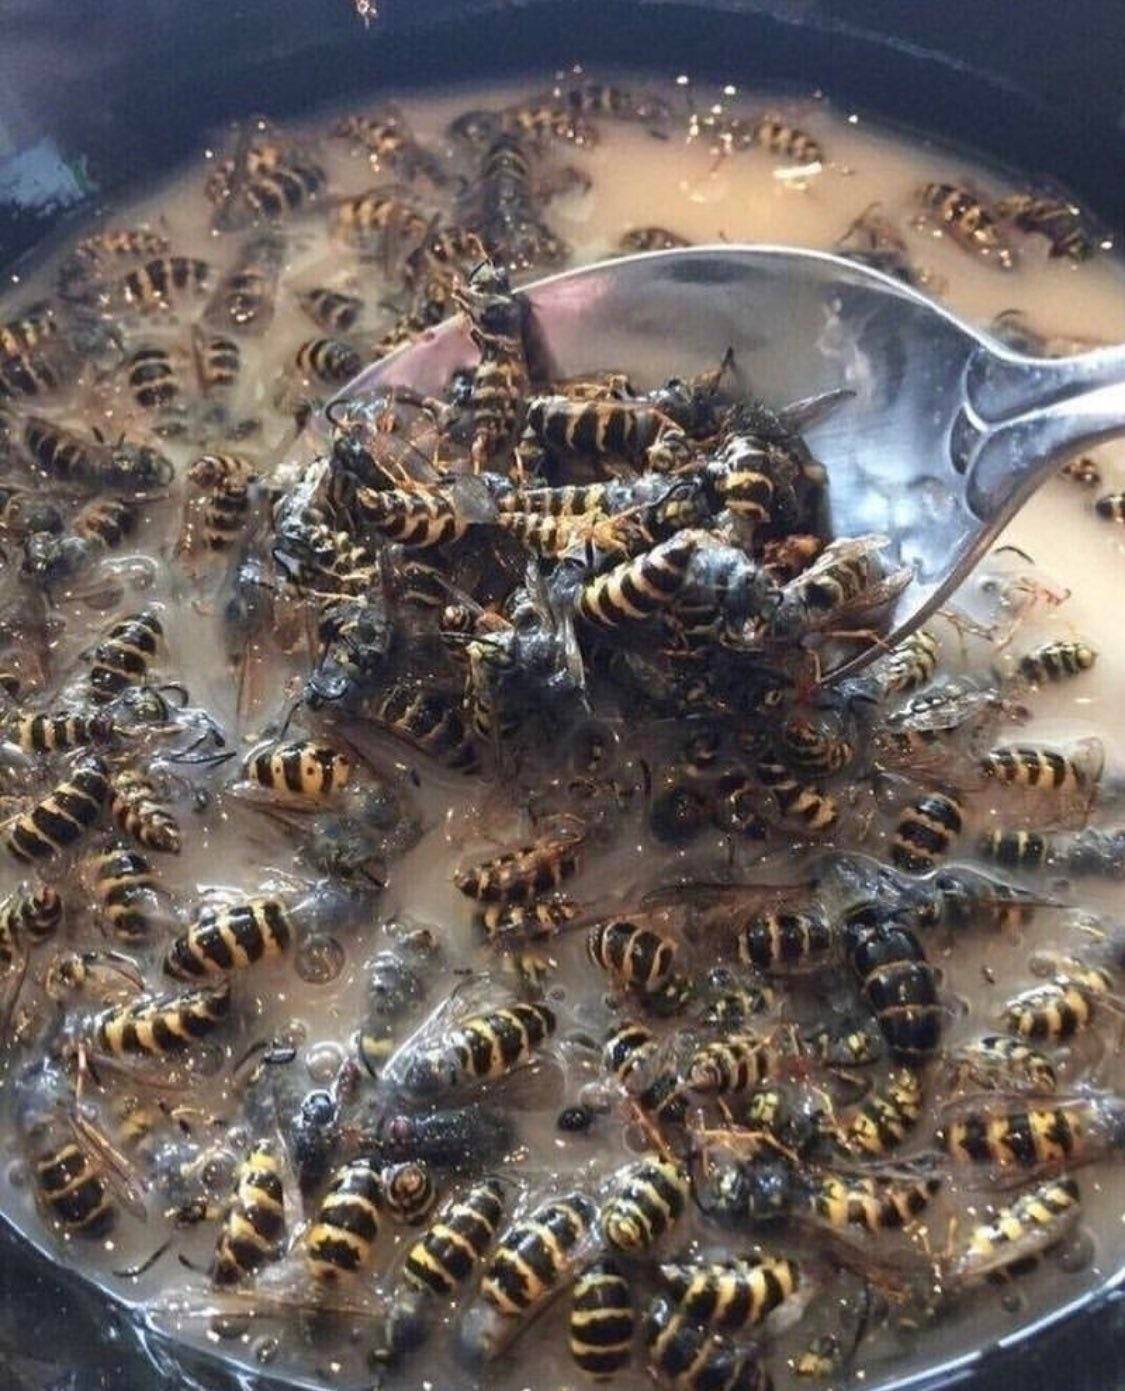 cursed images bees